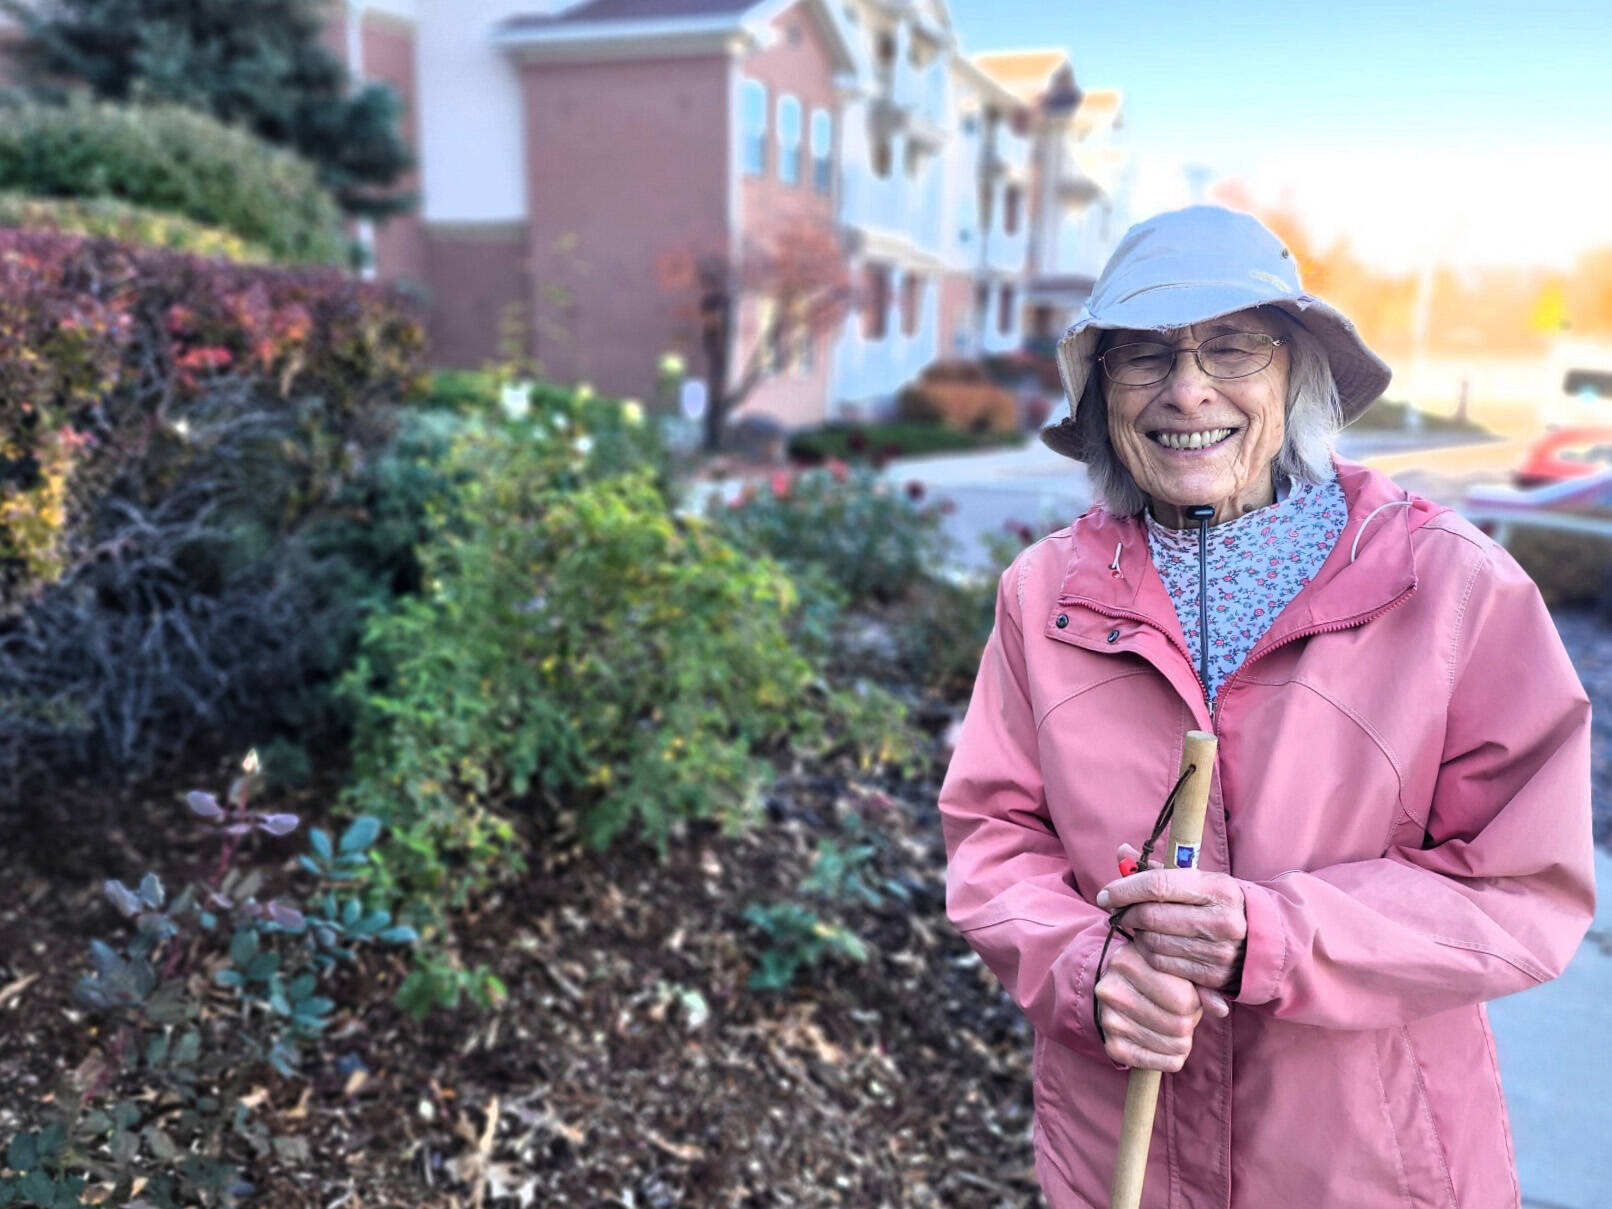 Marian Goble smiles in front of her home in Westminster, Colorado, near Denver. (Photo courtesy of Ben and Marian Goble)